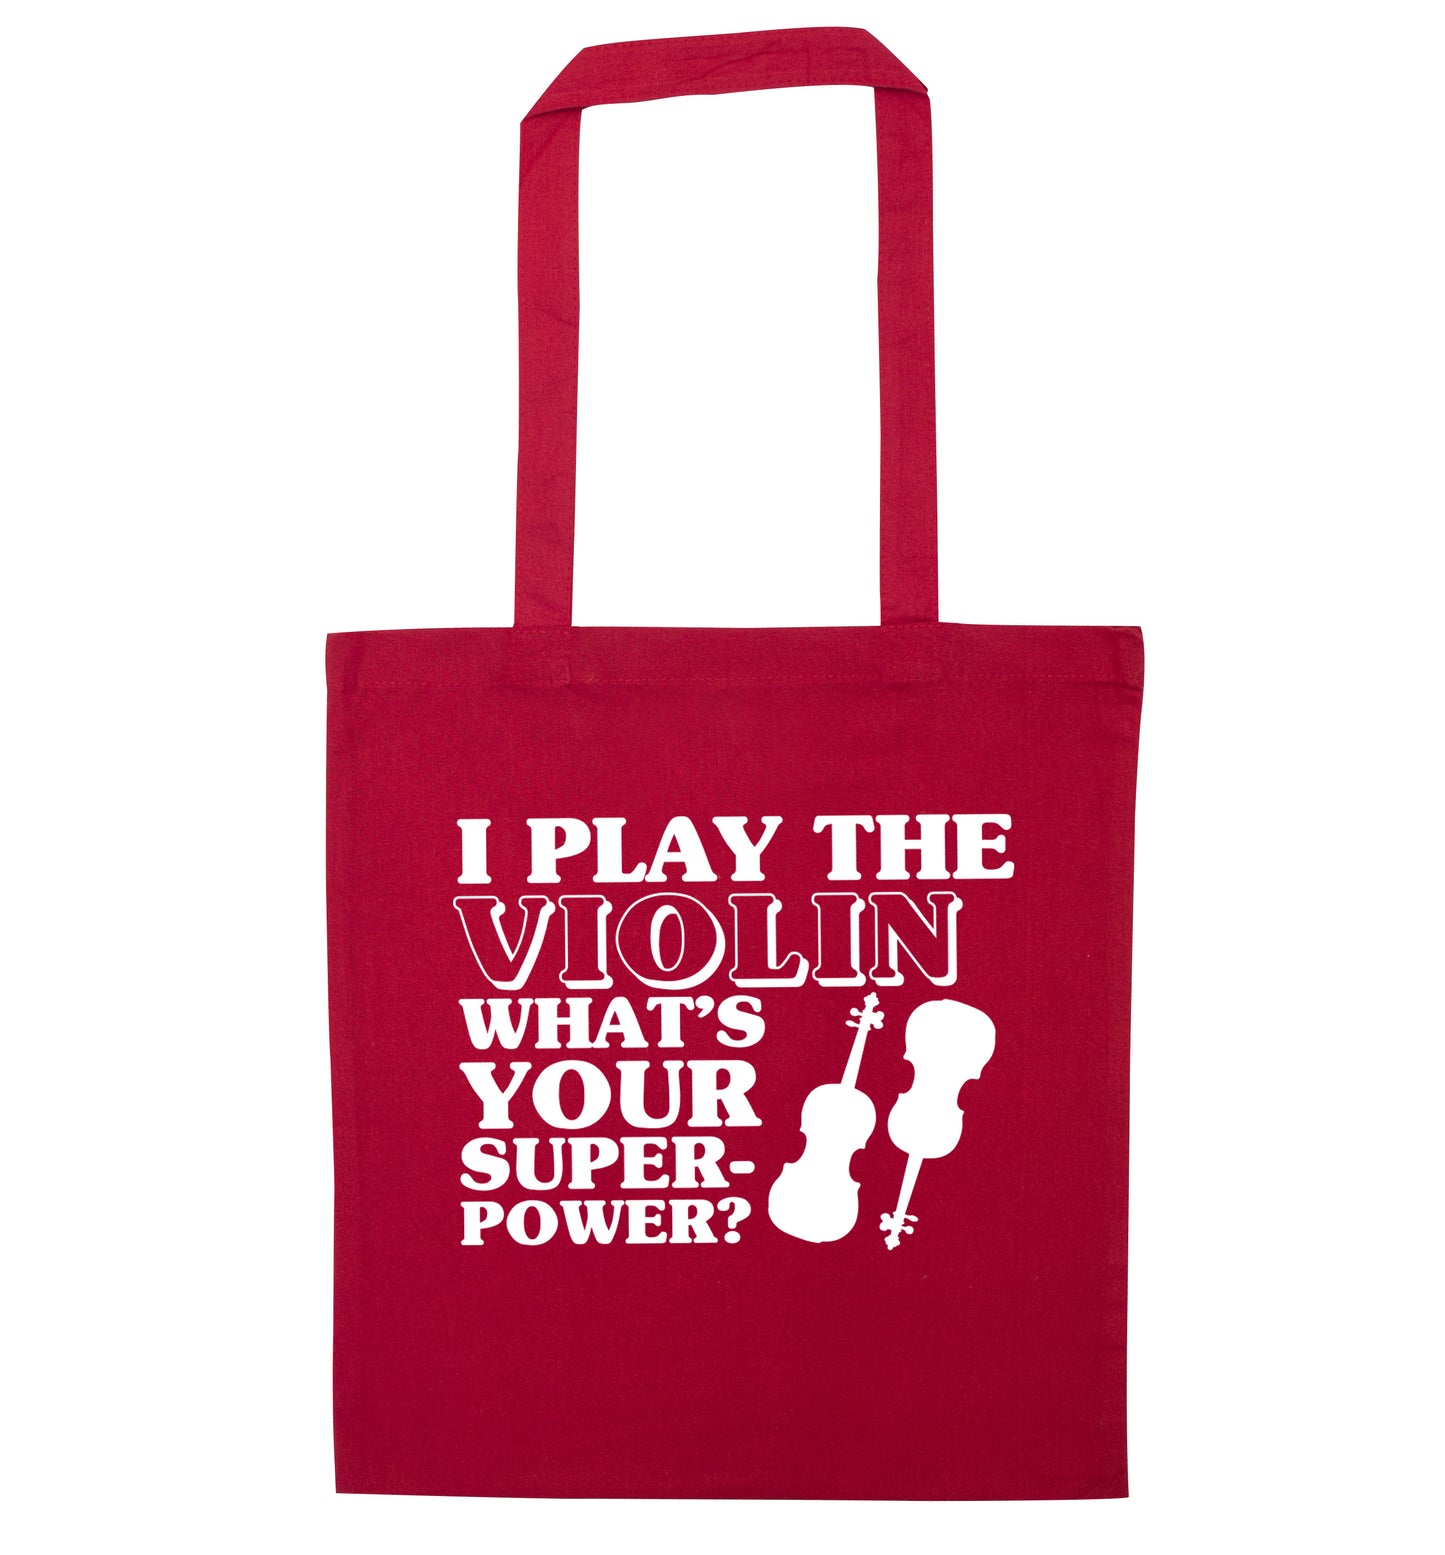 I Play Violin What's Your Superpower? red tote bag